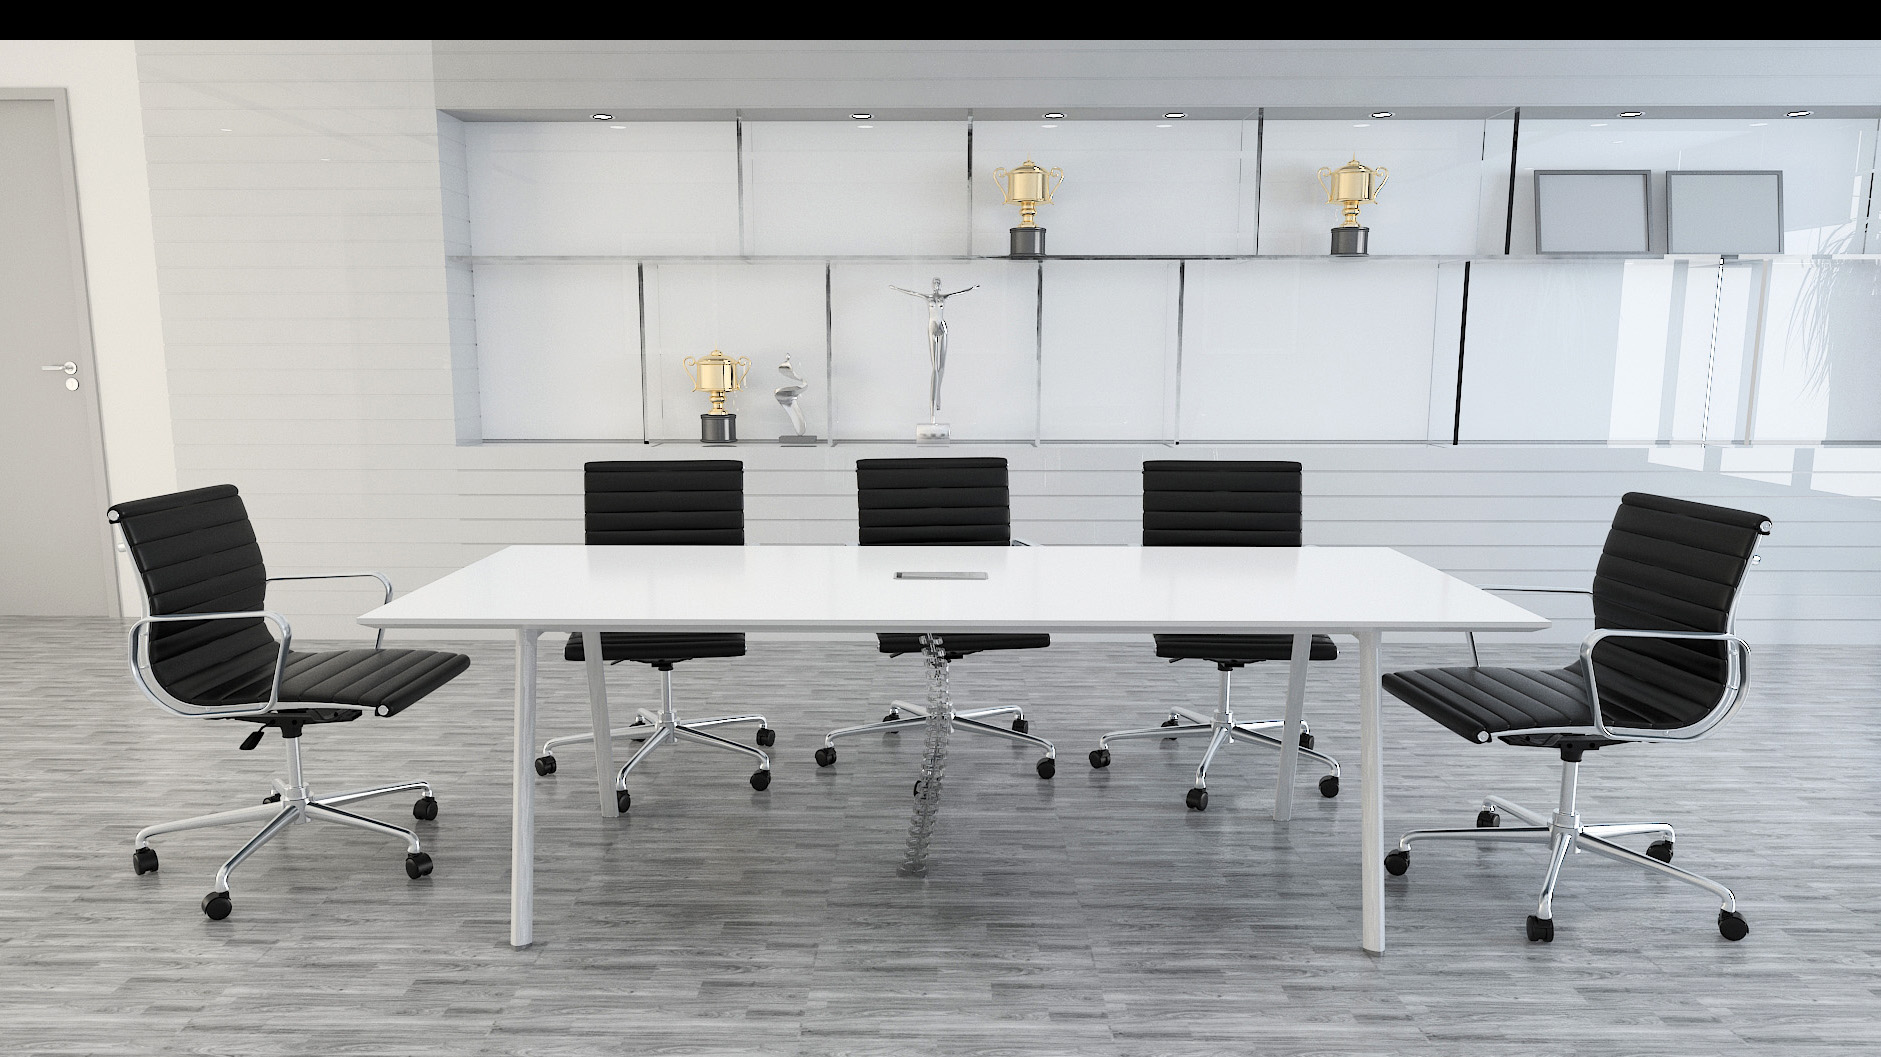 Fad Conference Table With Wire Management & Metal Leg  (L280 x W120 x H75)